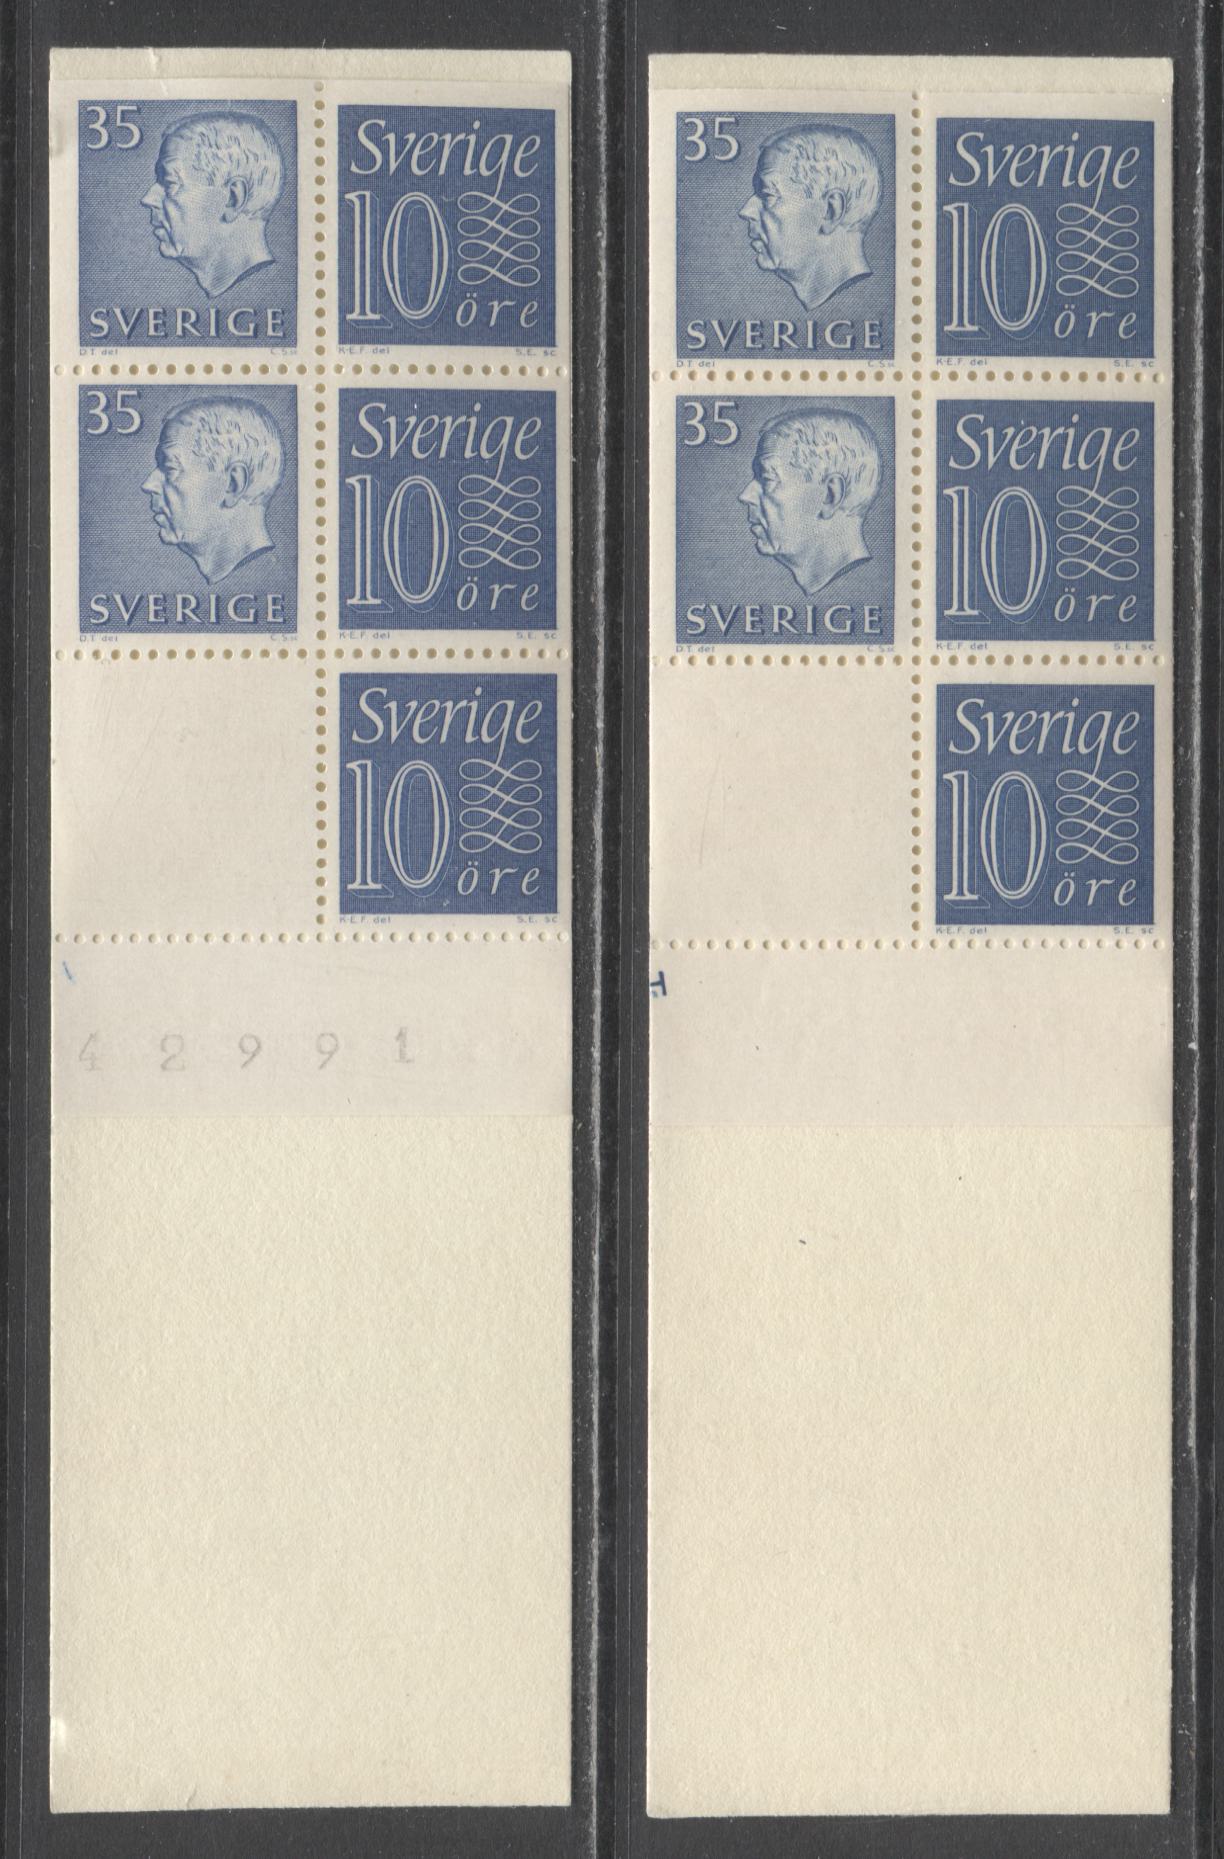 Lot 166 Sweden SC#586b (Facit #HA10OH)/586b (Facit #HA10OH) 1962 Re-Engraved King Gustav VI Adolf Definitive Issue, Inverted Panes, 10 Ore Stamps At Right, Different Selvedge Markings, 2 VFNH Booklets of 6 (2 +3 + Label), Estimated Value $30